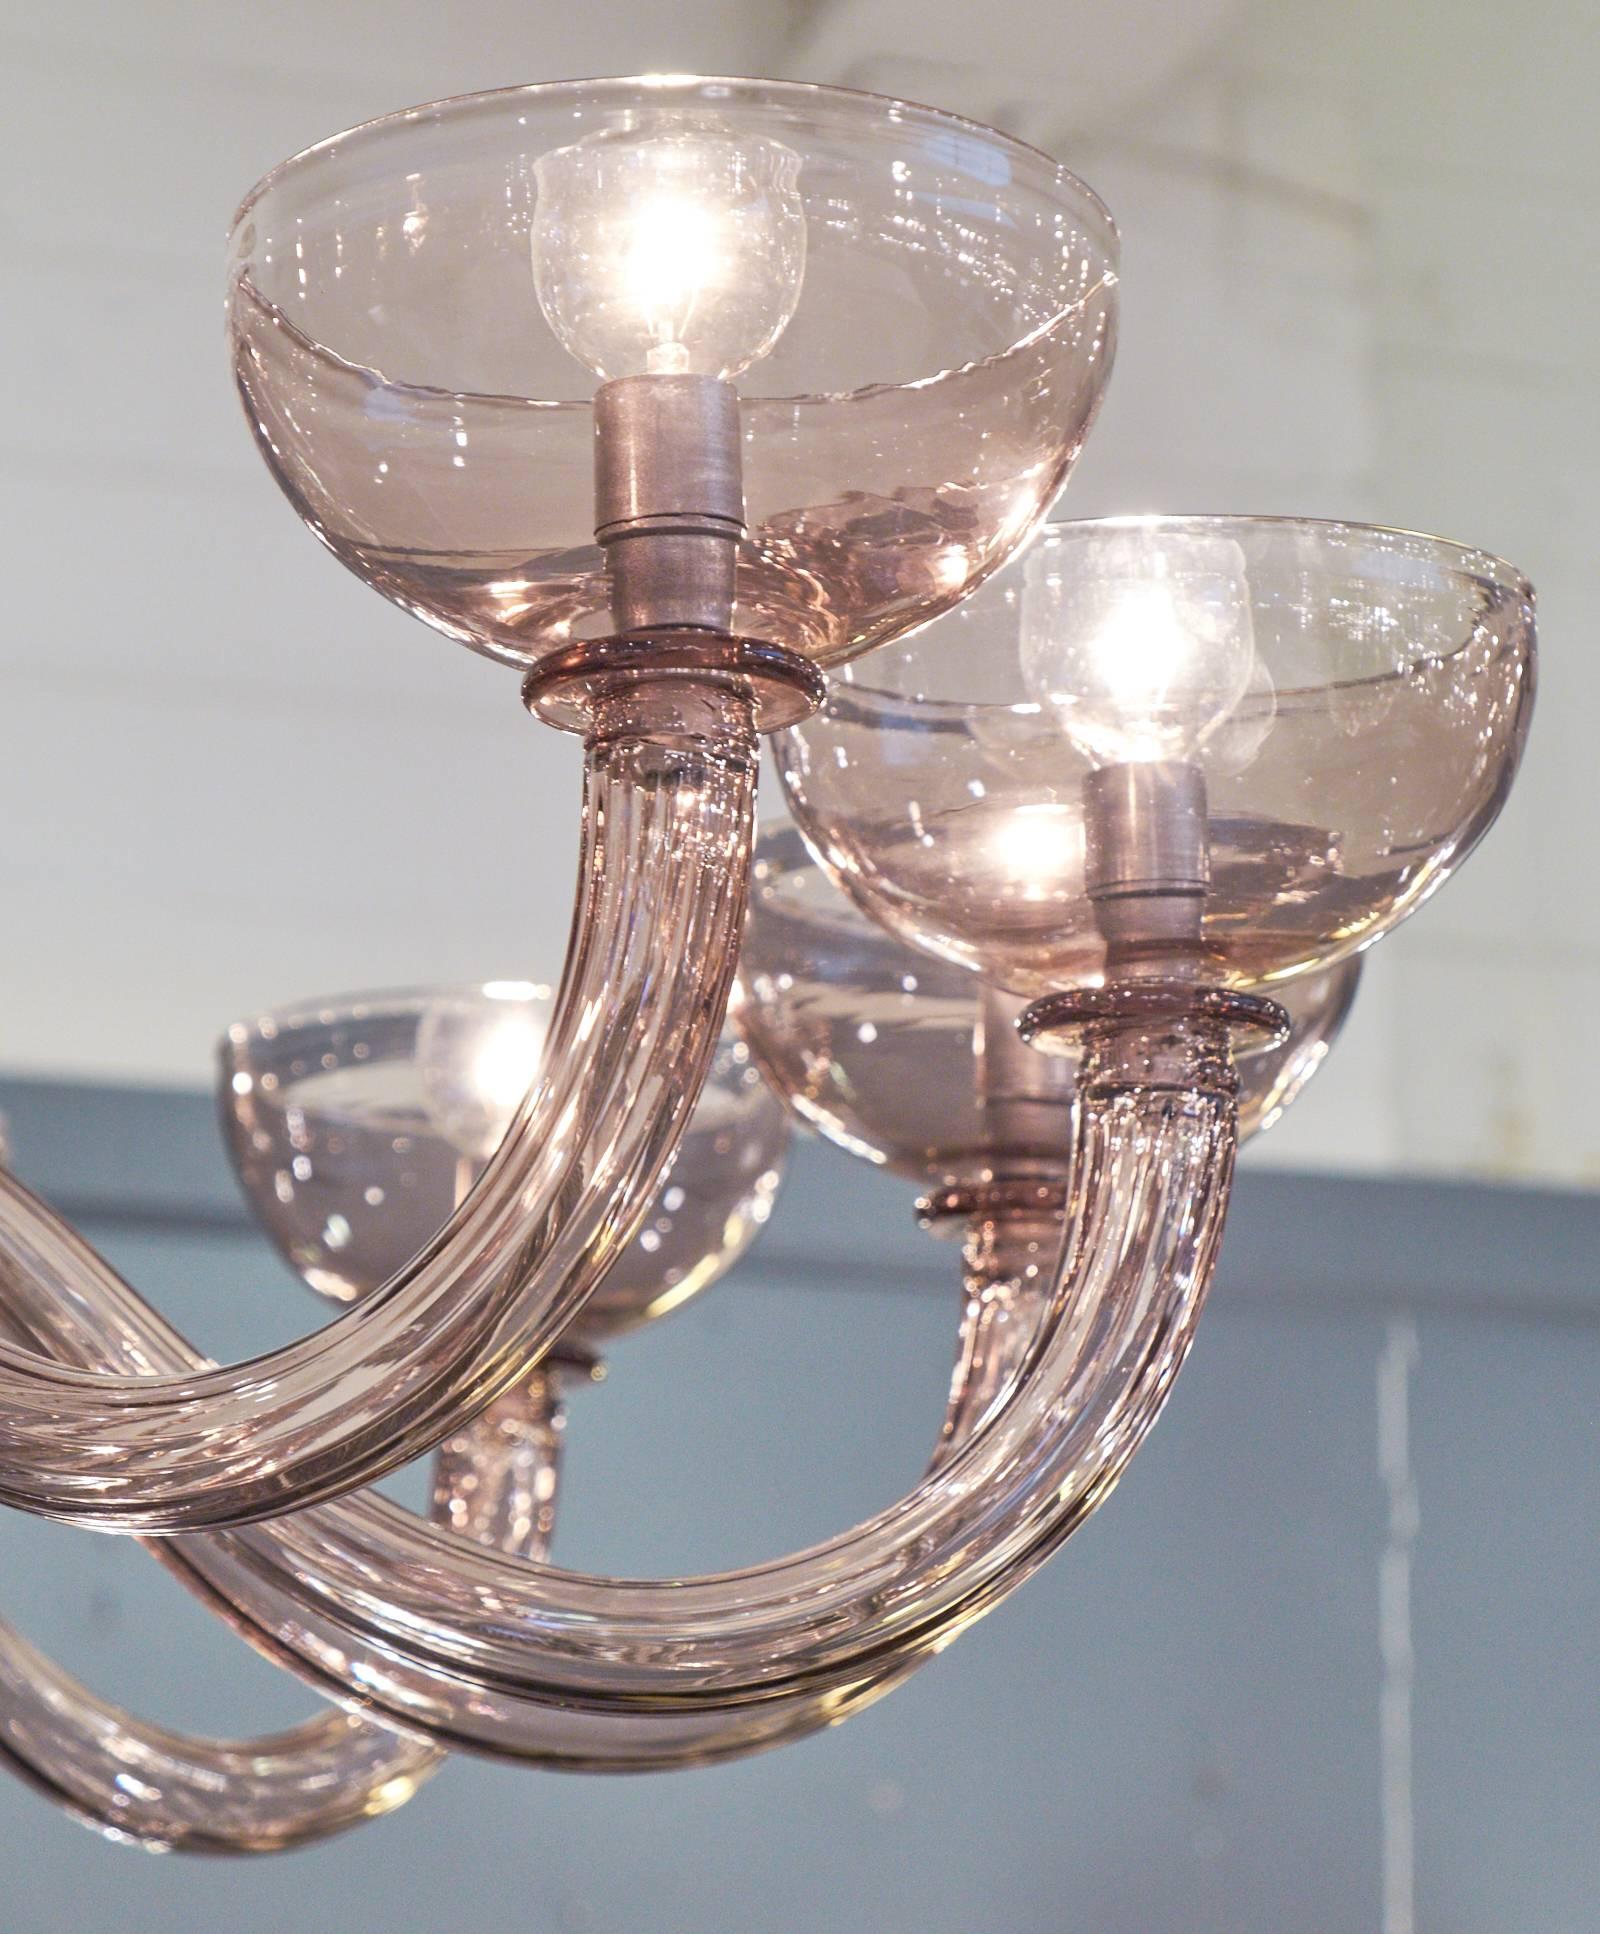 Amethyst Murano Glass Chandelier with 12 Branches In Excellent Condition For Sale In Austin, TX